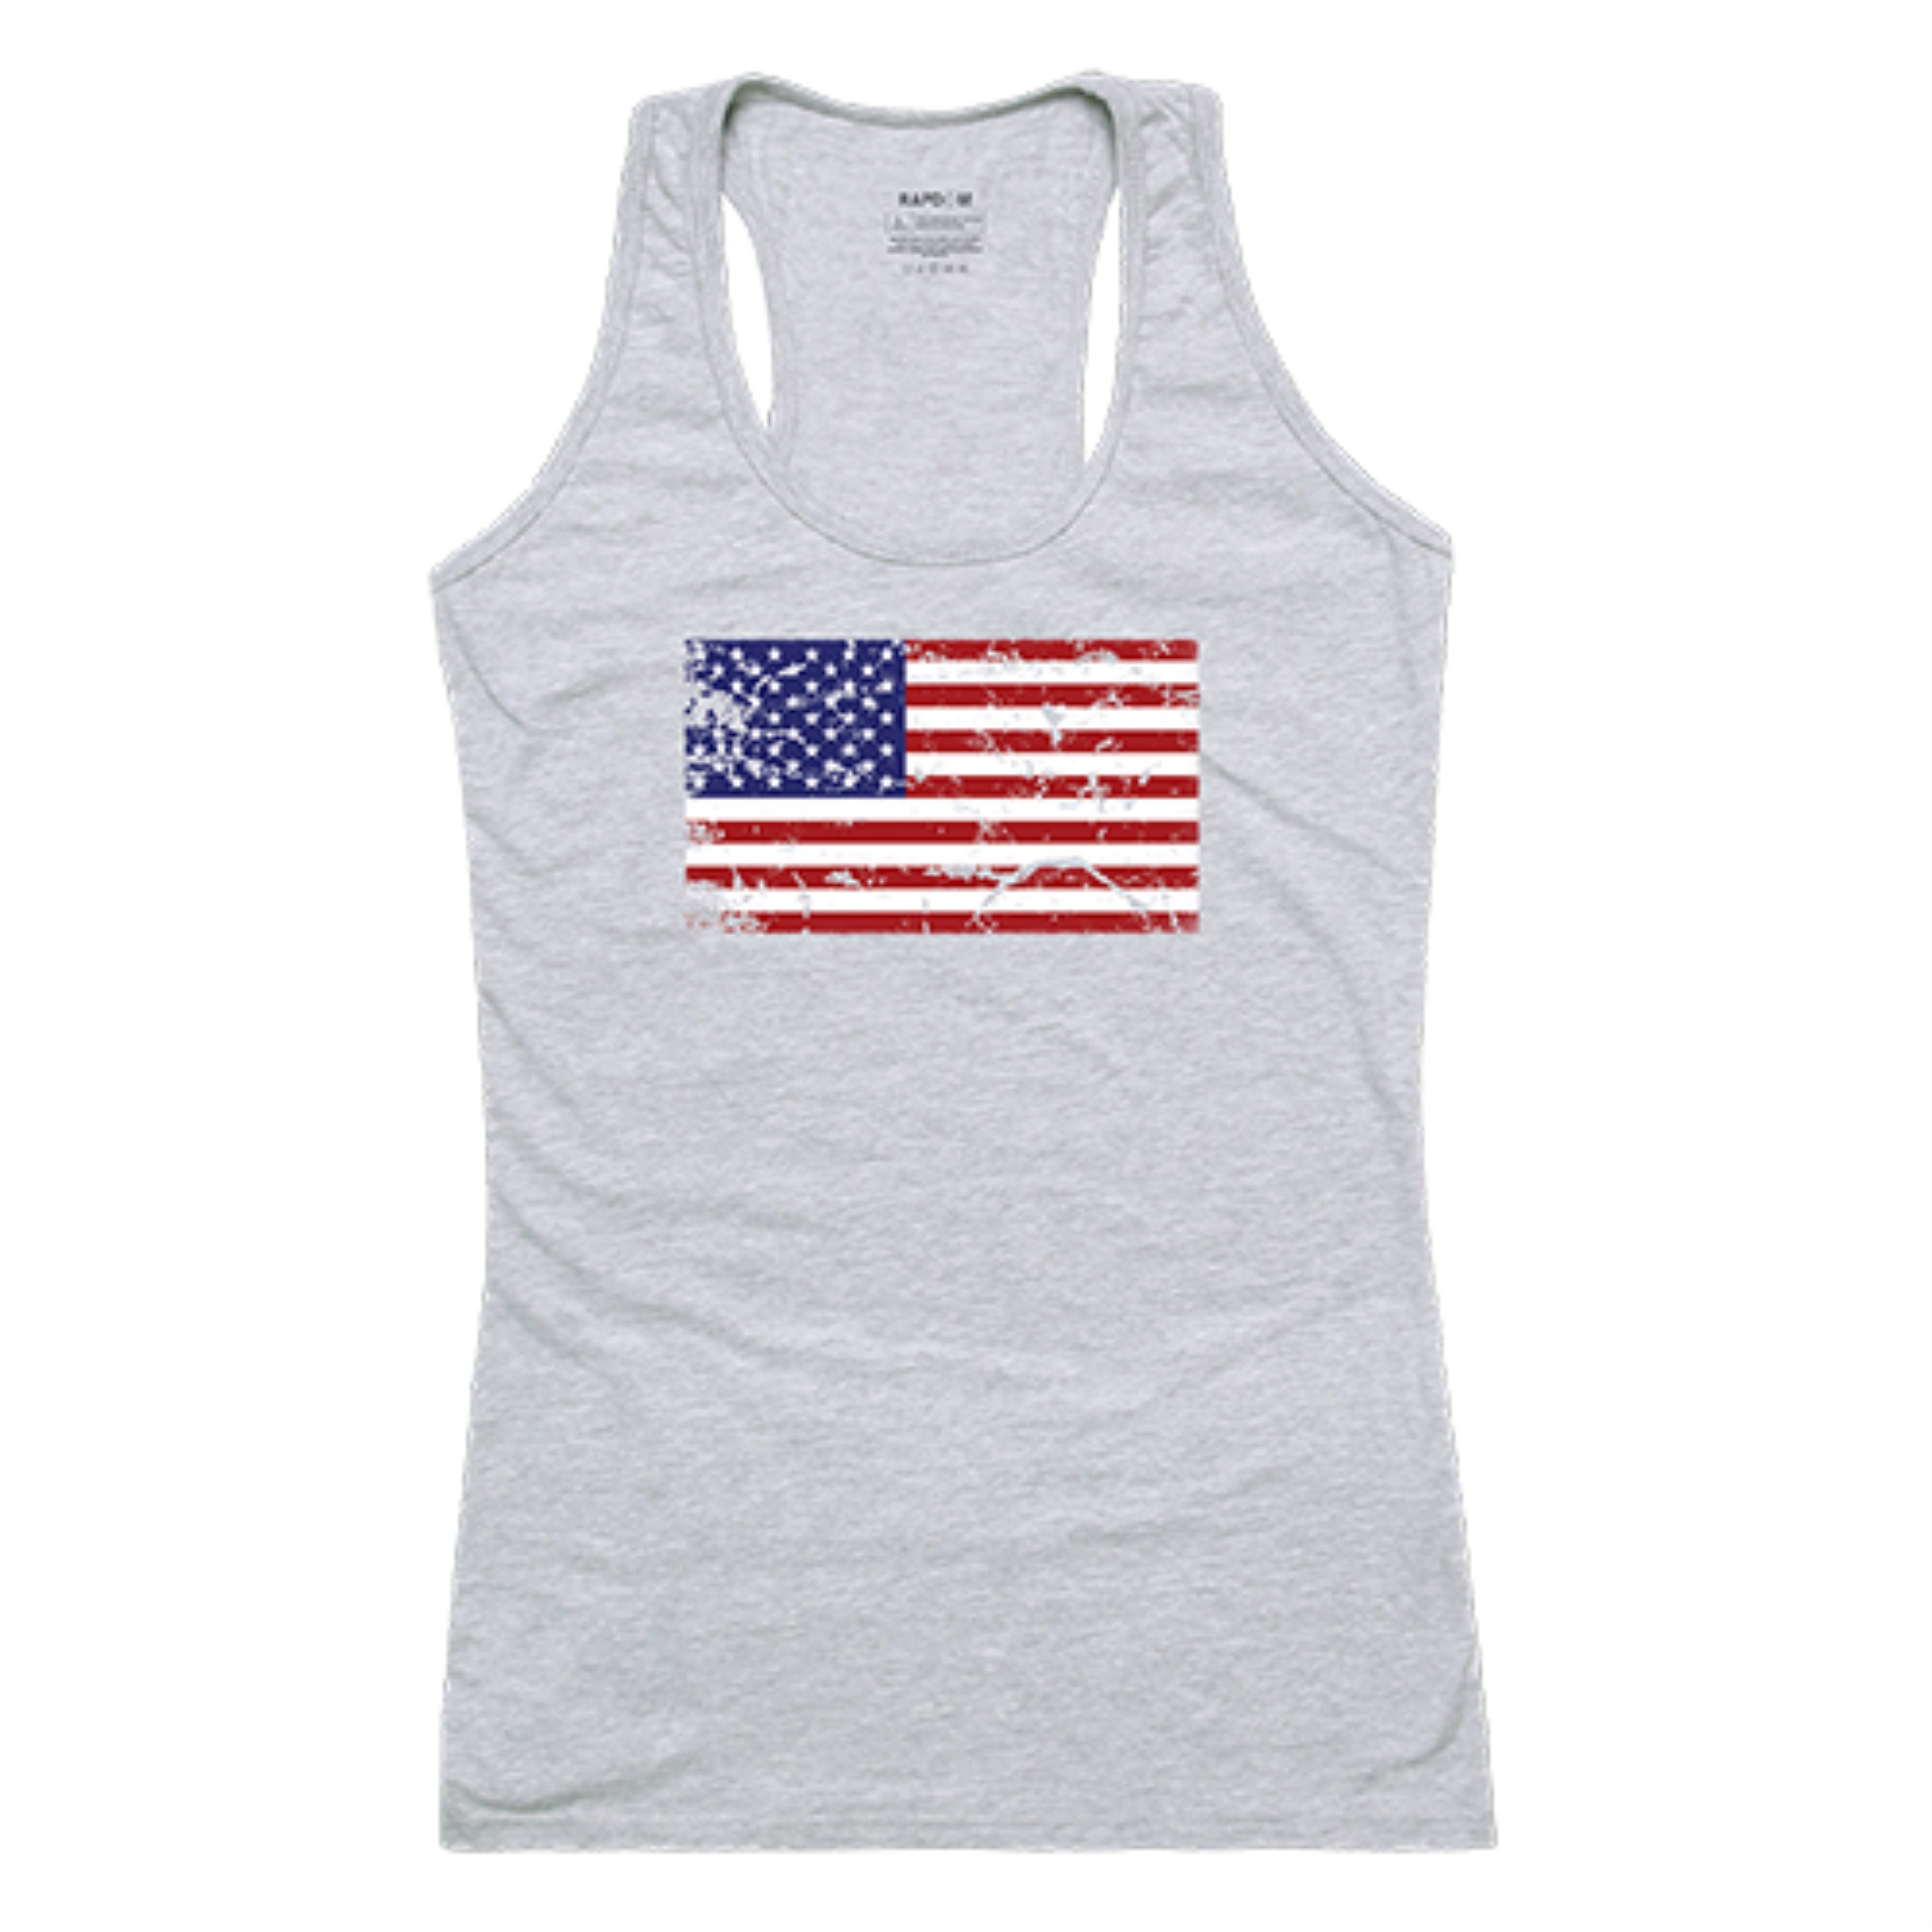 Rapid Dominance WomenGraphicTank, US Flag 2, HGY, XL